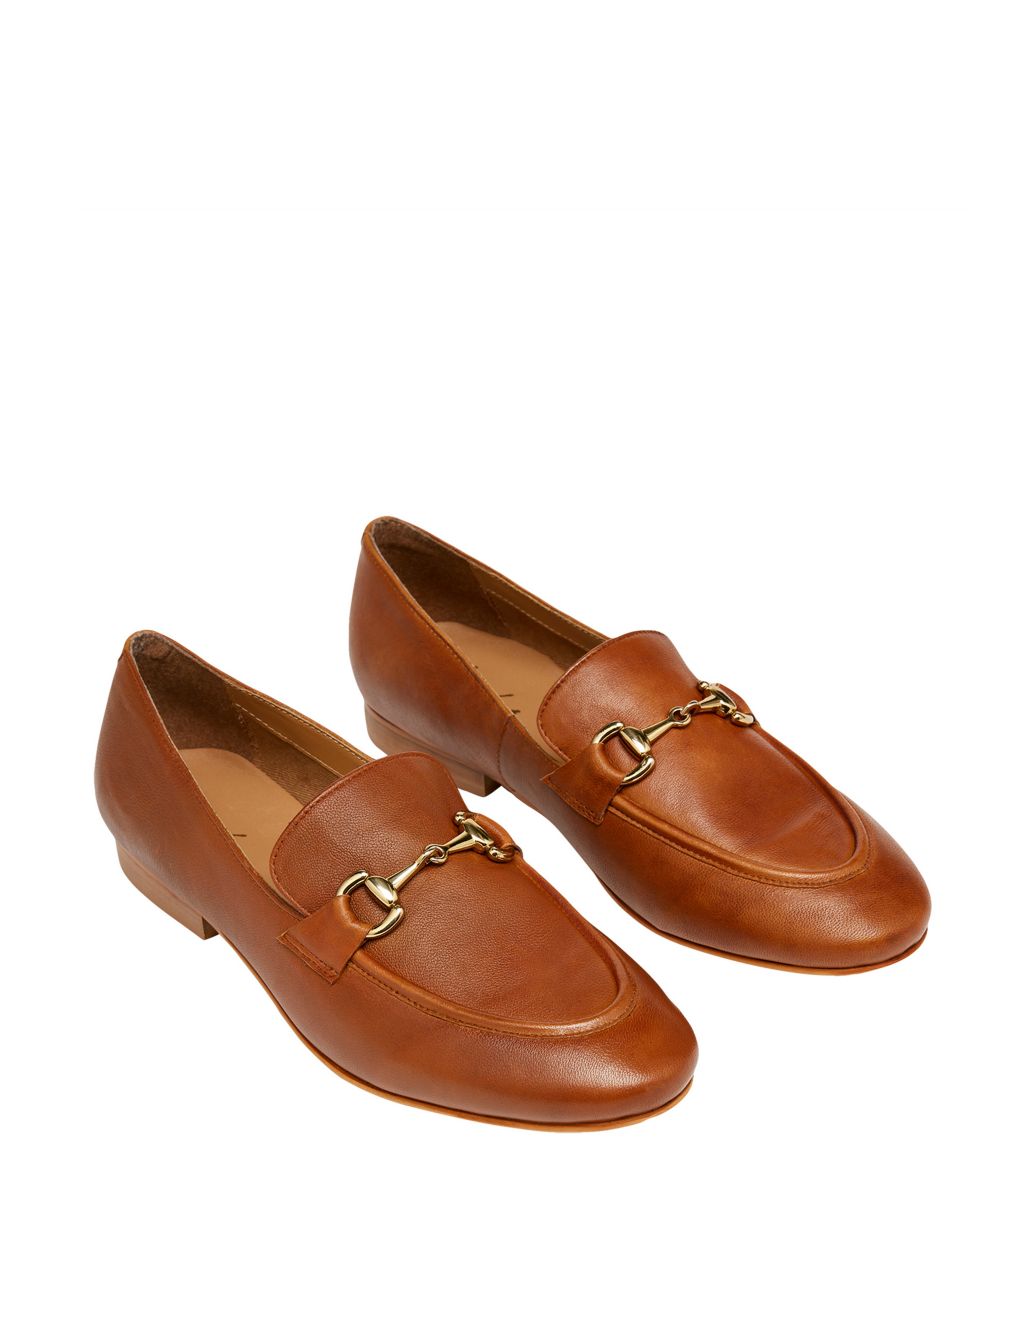 Leather Bar Flat Loafers image 2